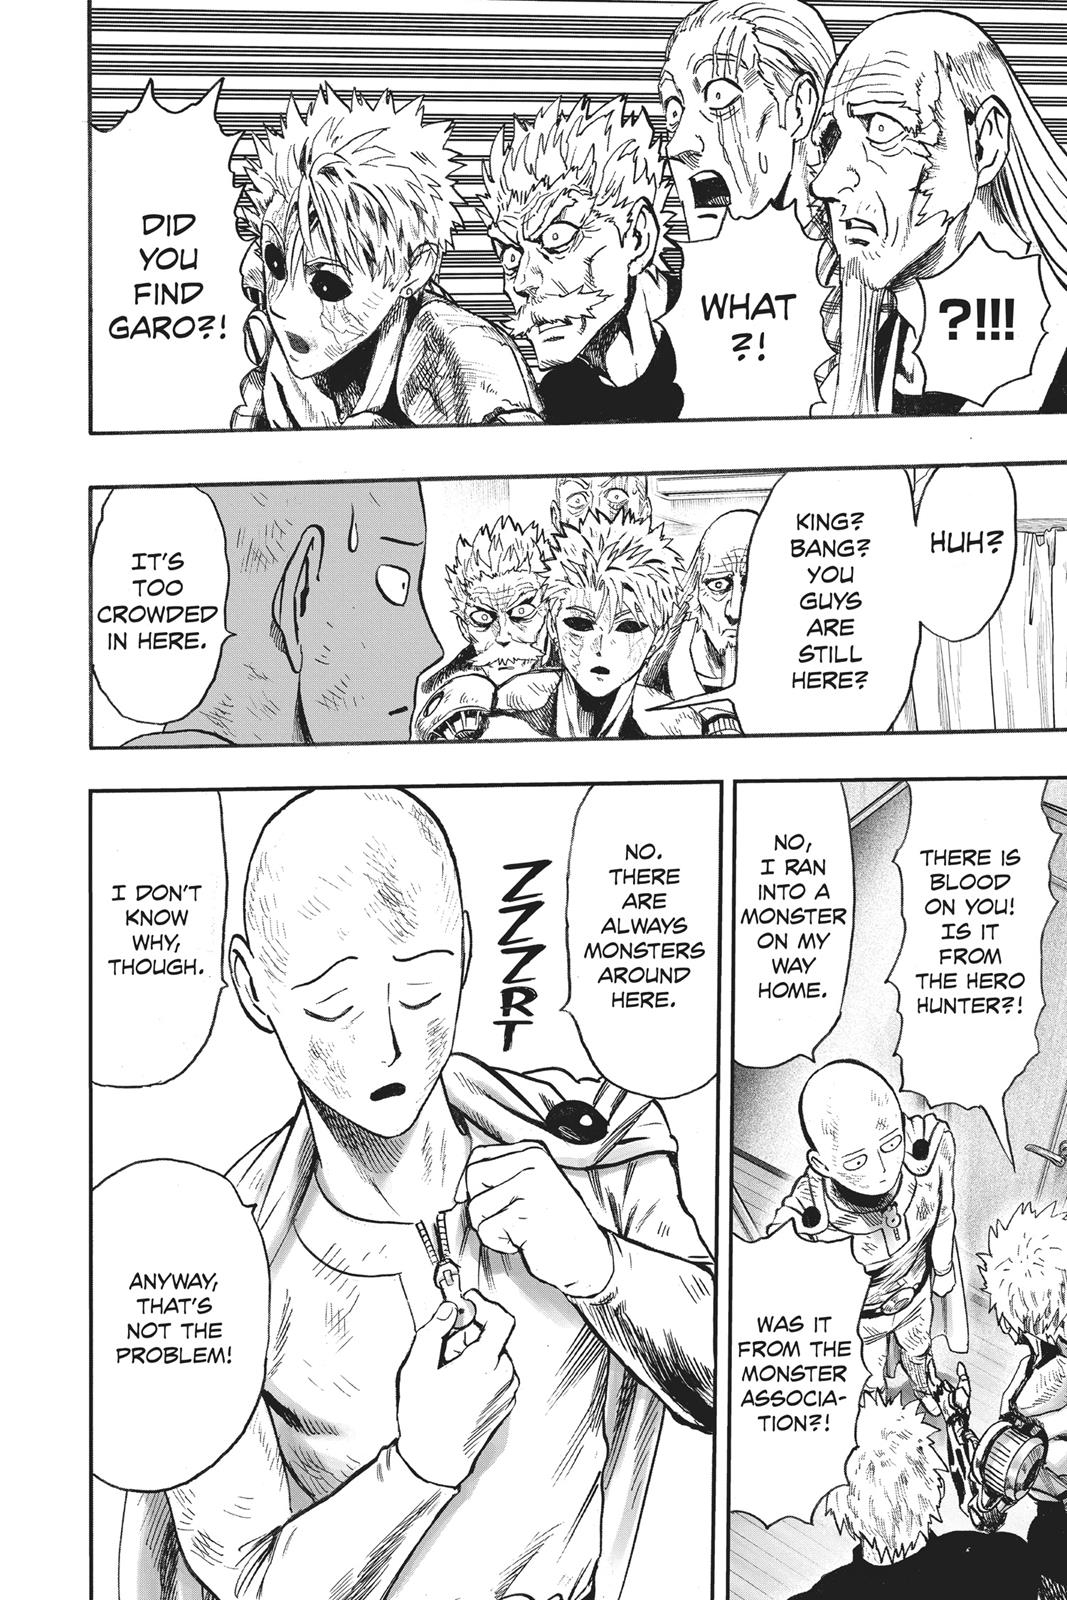 One-Punch Man, Punch 90 image 06